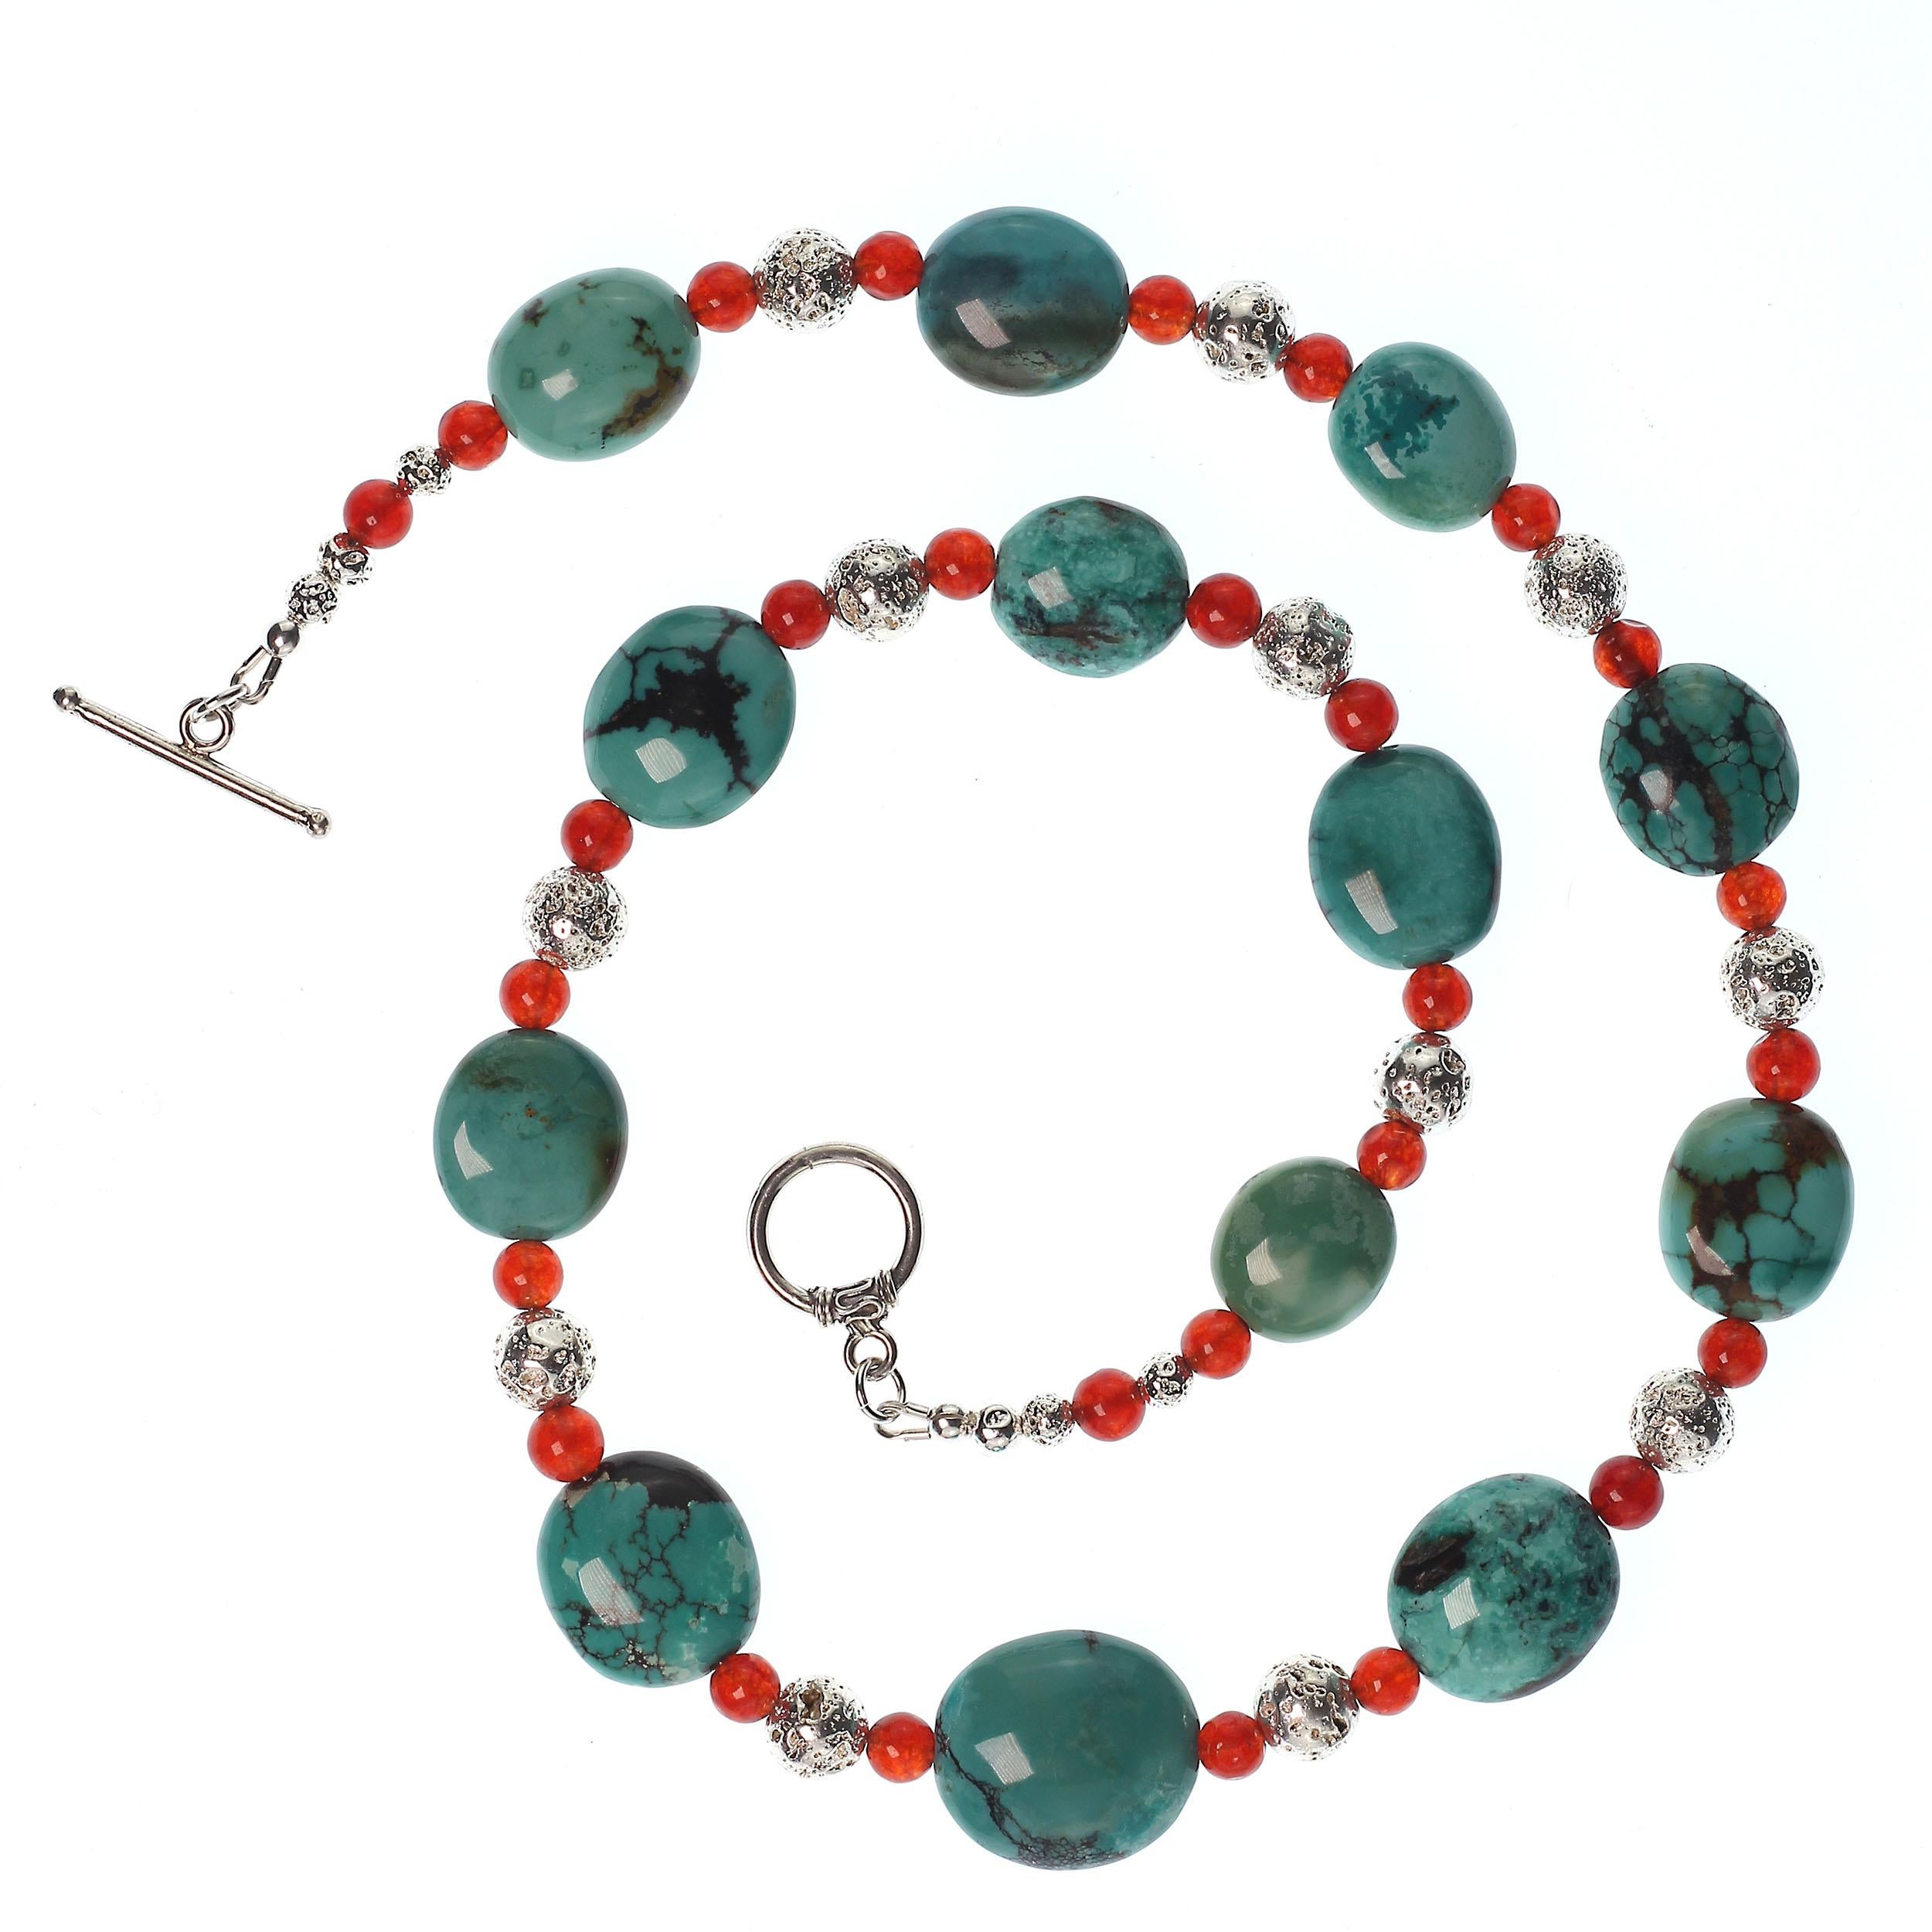 Bead AJD 22 Inch Southwest Influence Necklace of Turquoise, Carnelian, and Silver